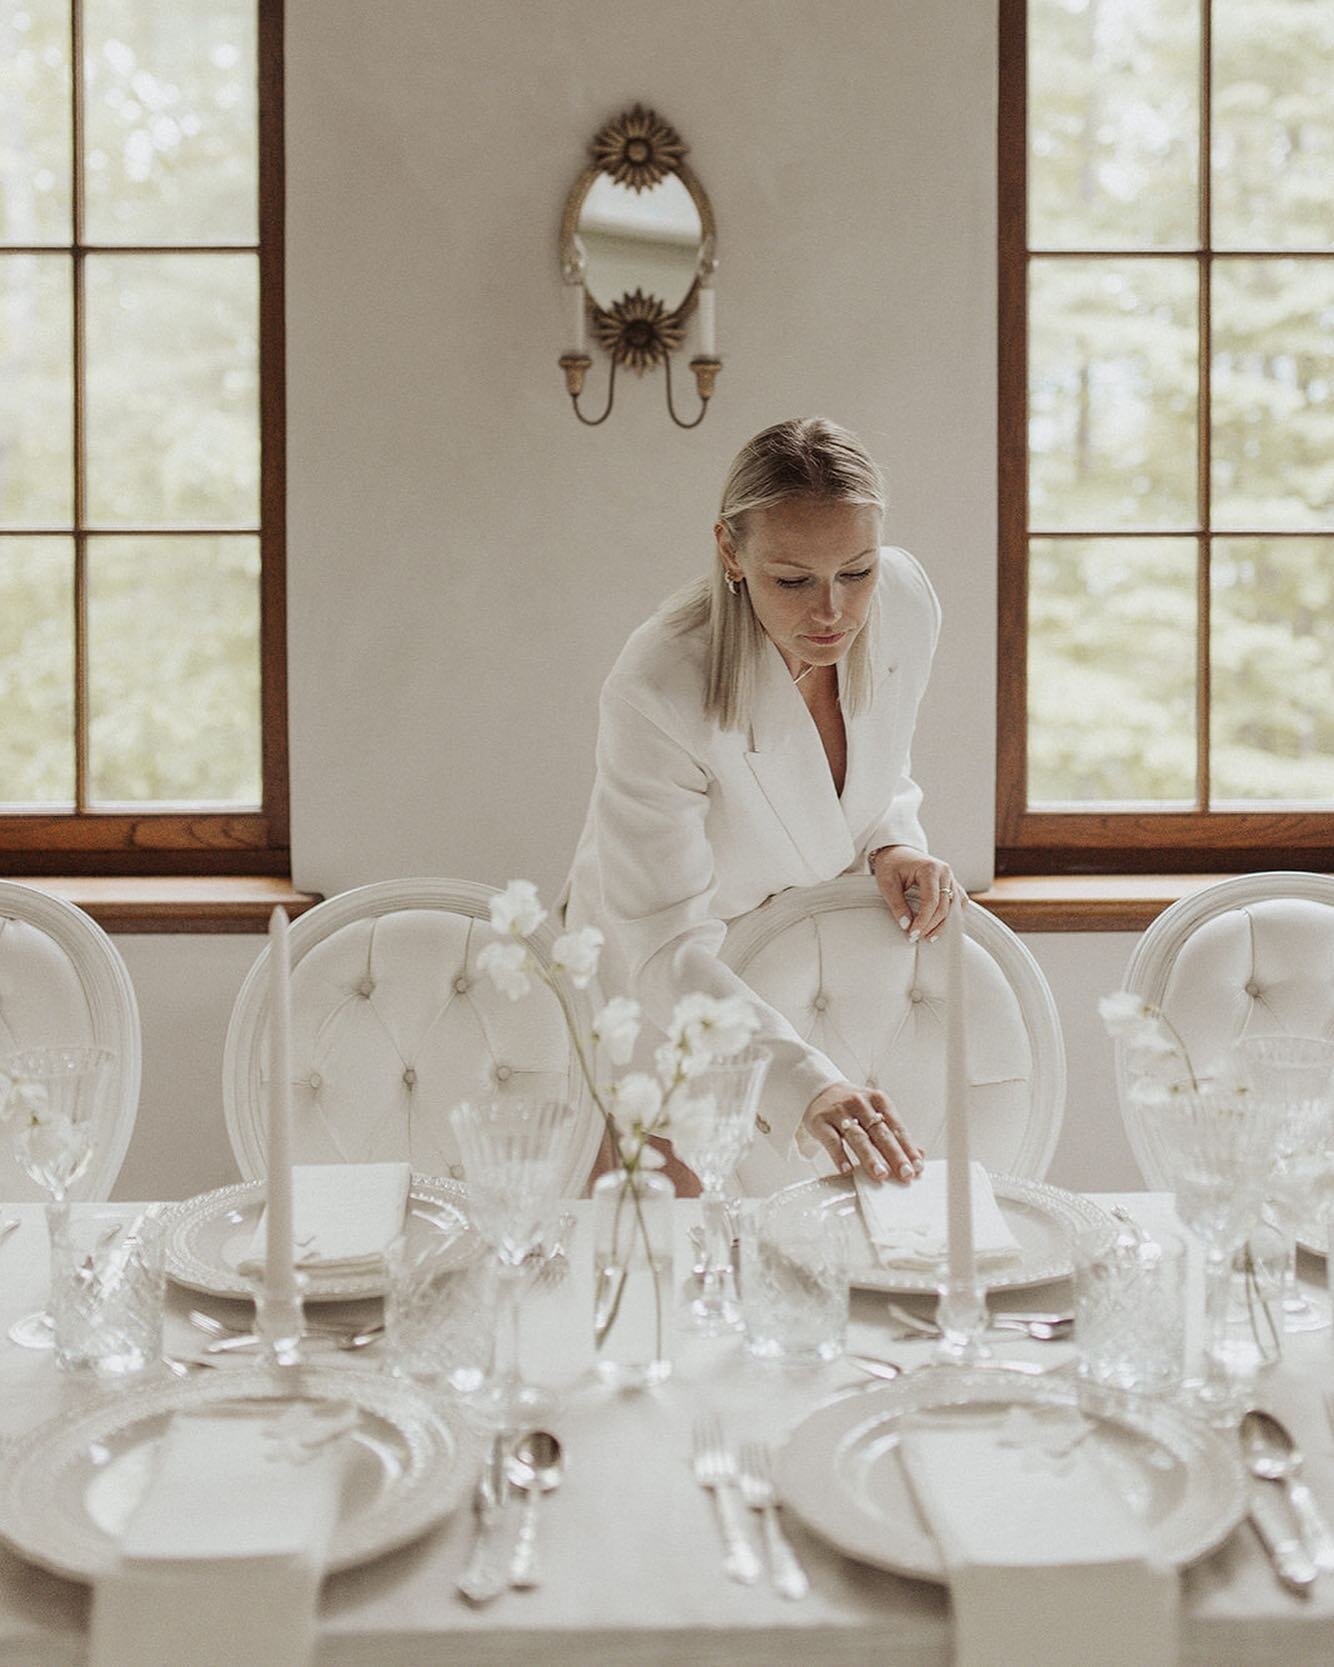 Day-of wedding planner, a must, and an investment !✨

Wedding season is just around the corner, and you still do not have a day-of wedding coordinator? Are you starting to feel overwhelmed with all the details and you have no idea how it will come to